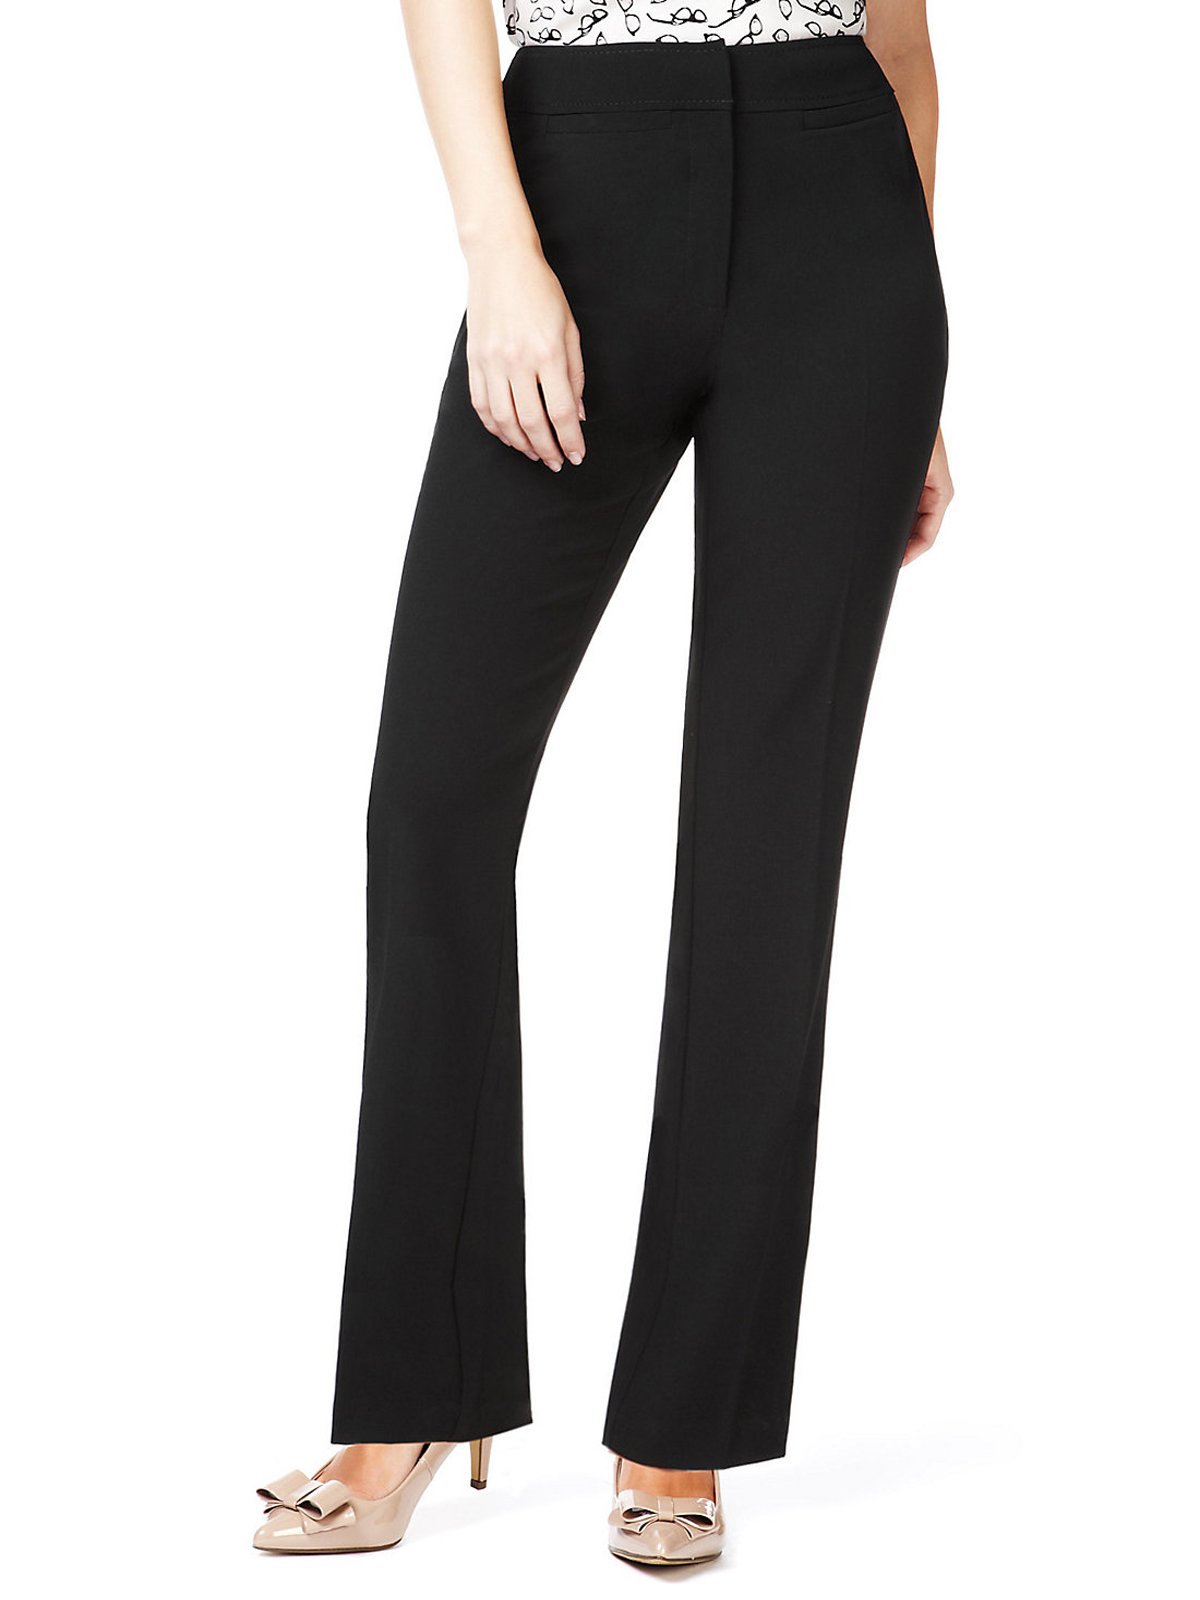 Marks and Spencer - - M&5 BLACK Flat Front Trousers - Size 12